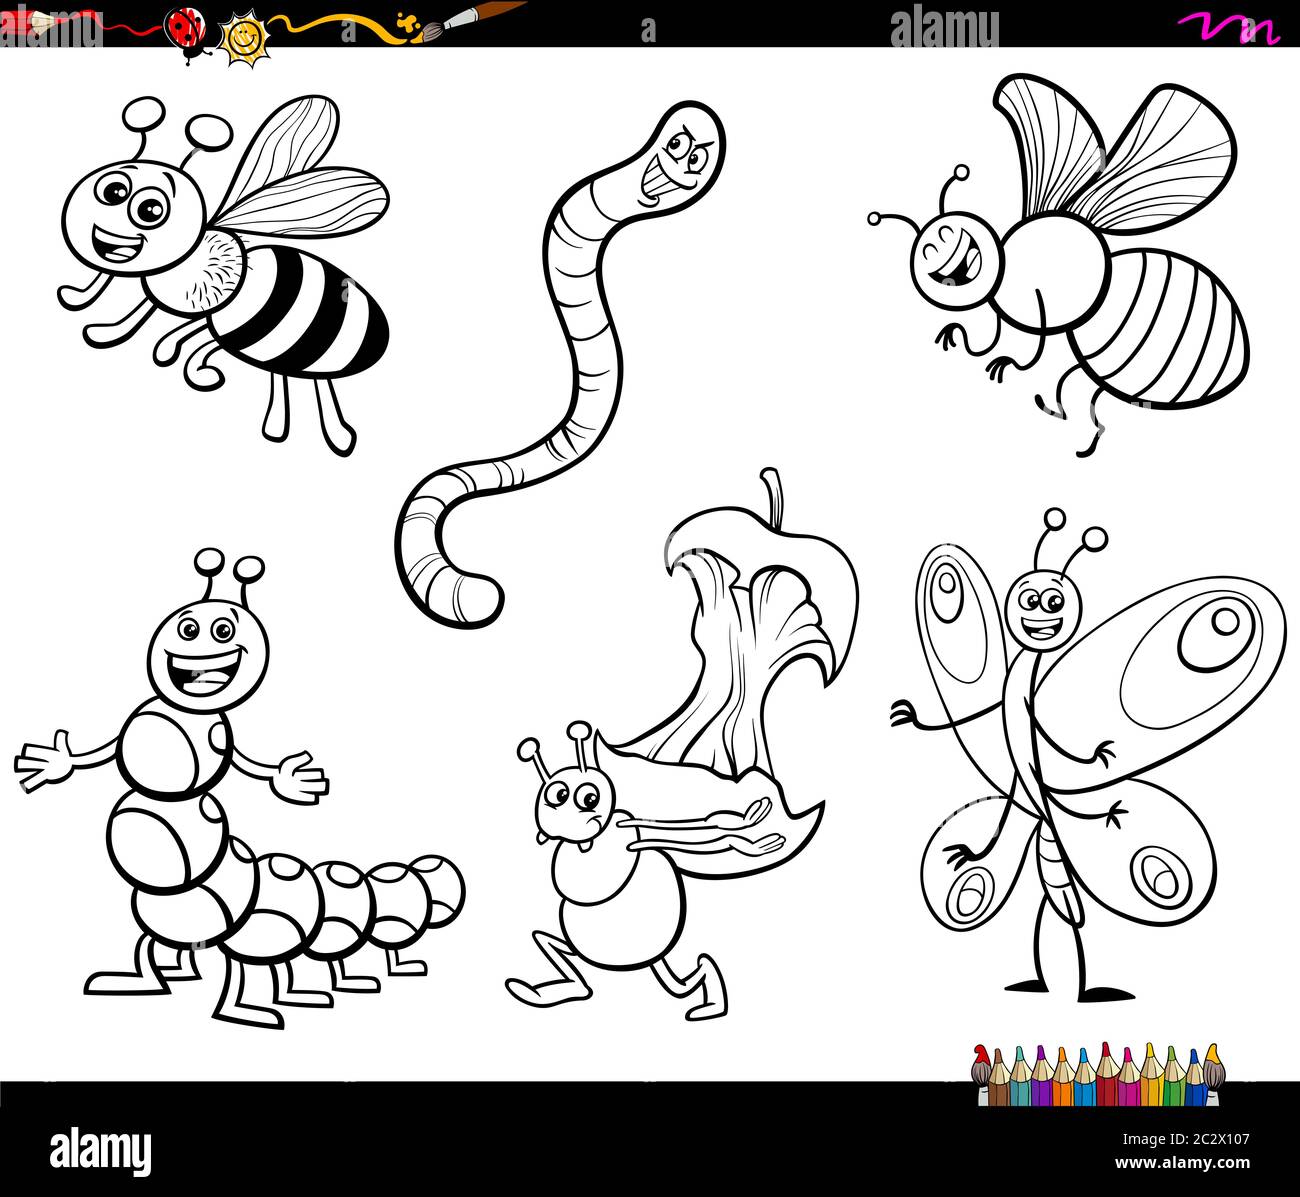 cartoon insects characters coloring book page Stock Photo